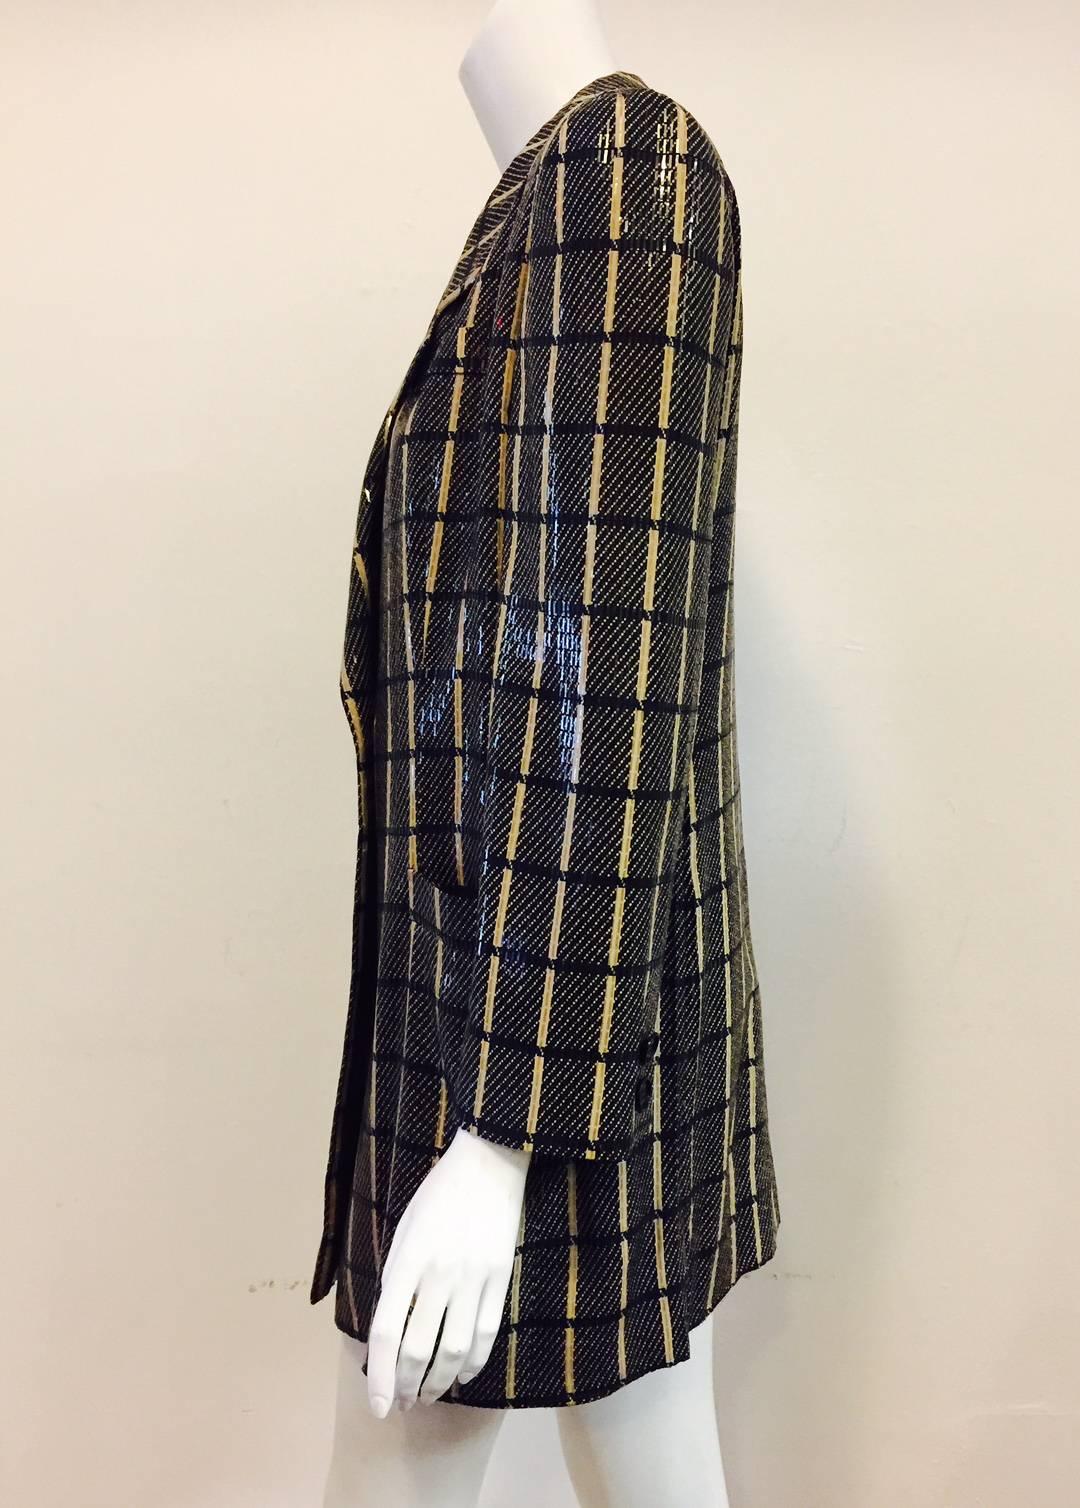 Women's Giorgio Armani Black and Tan Window Pane Evening Jacket With Rectangular Sequins For Sale